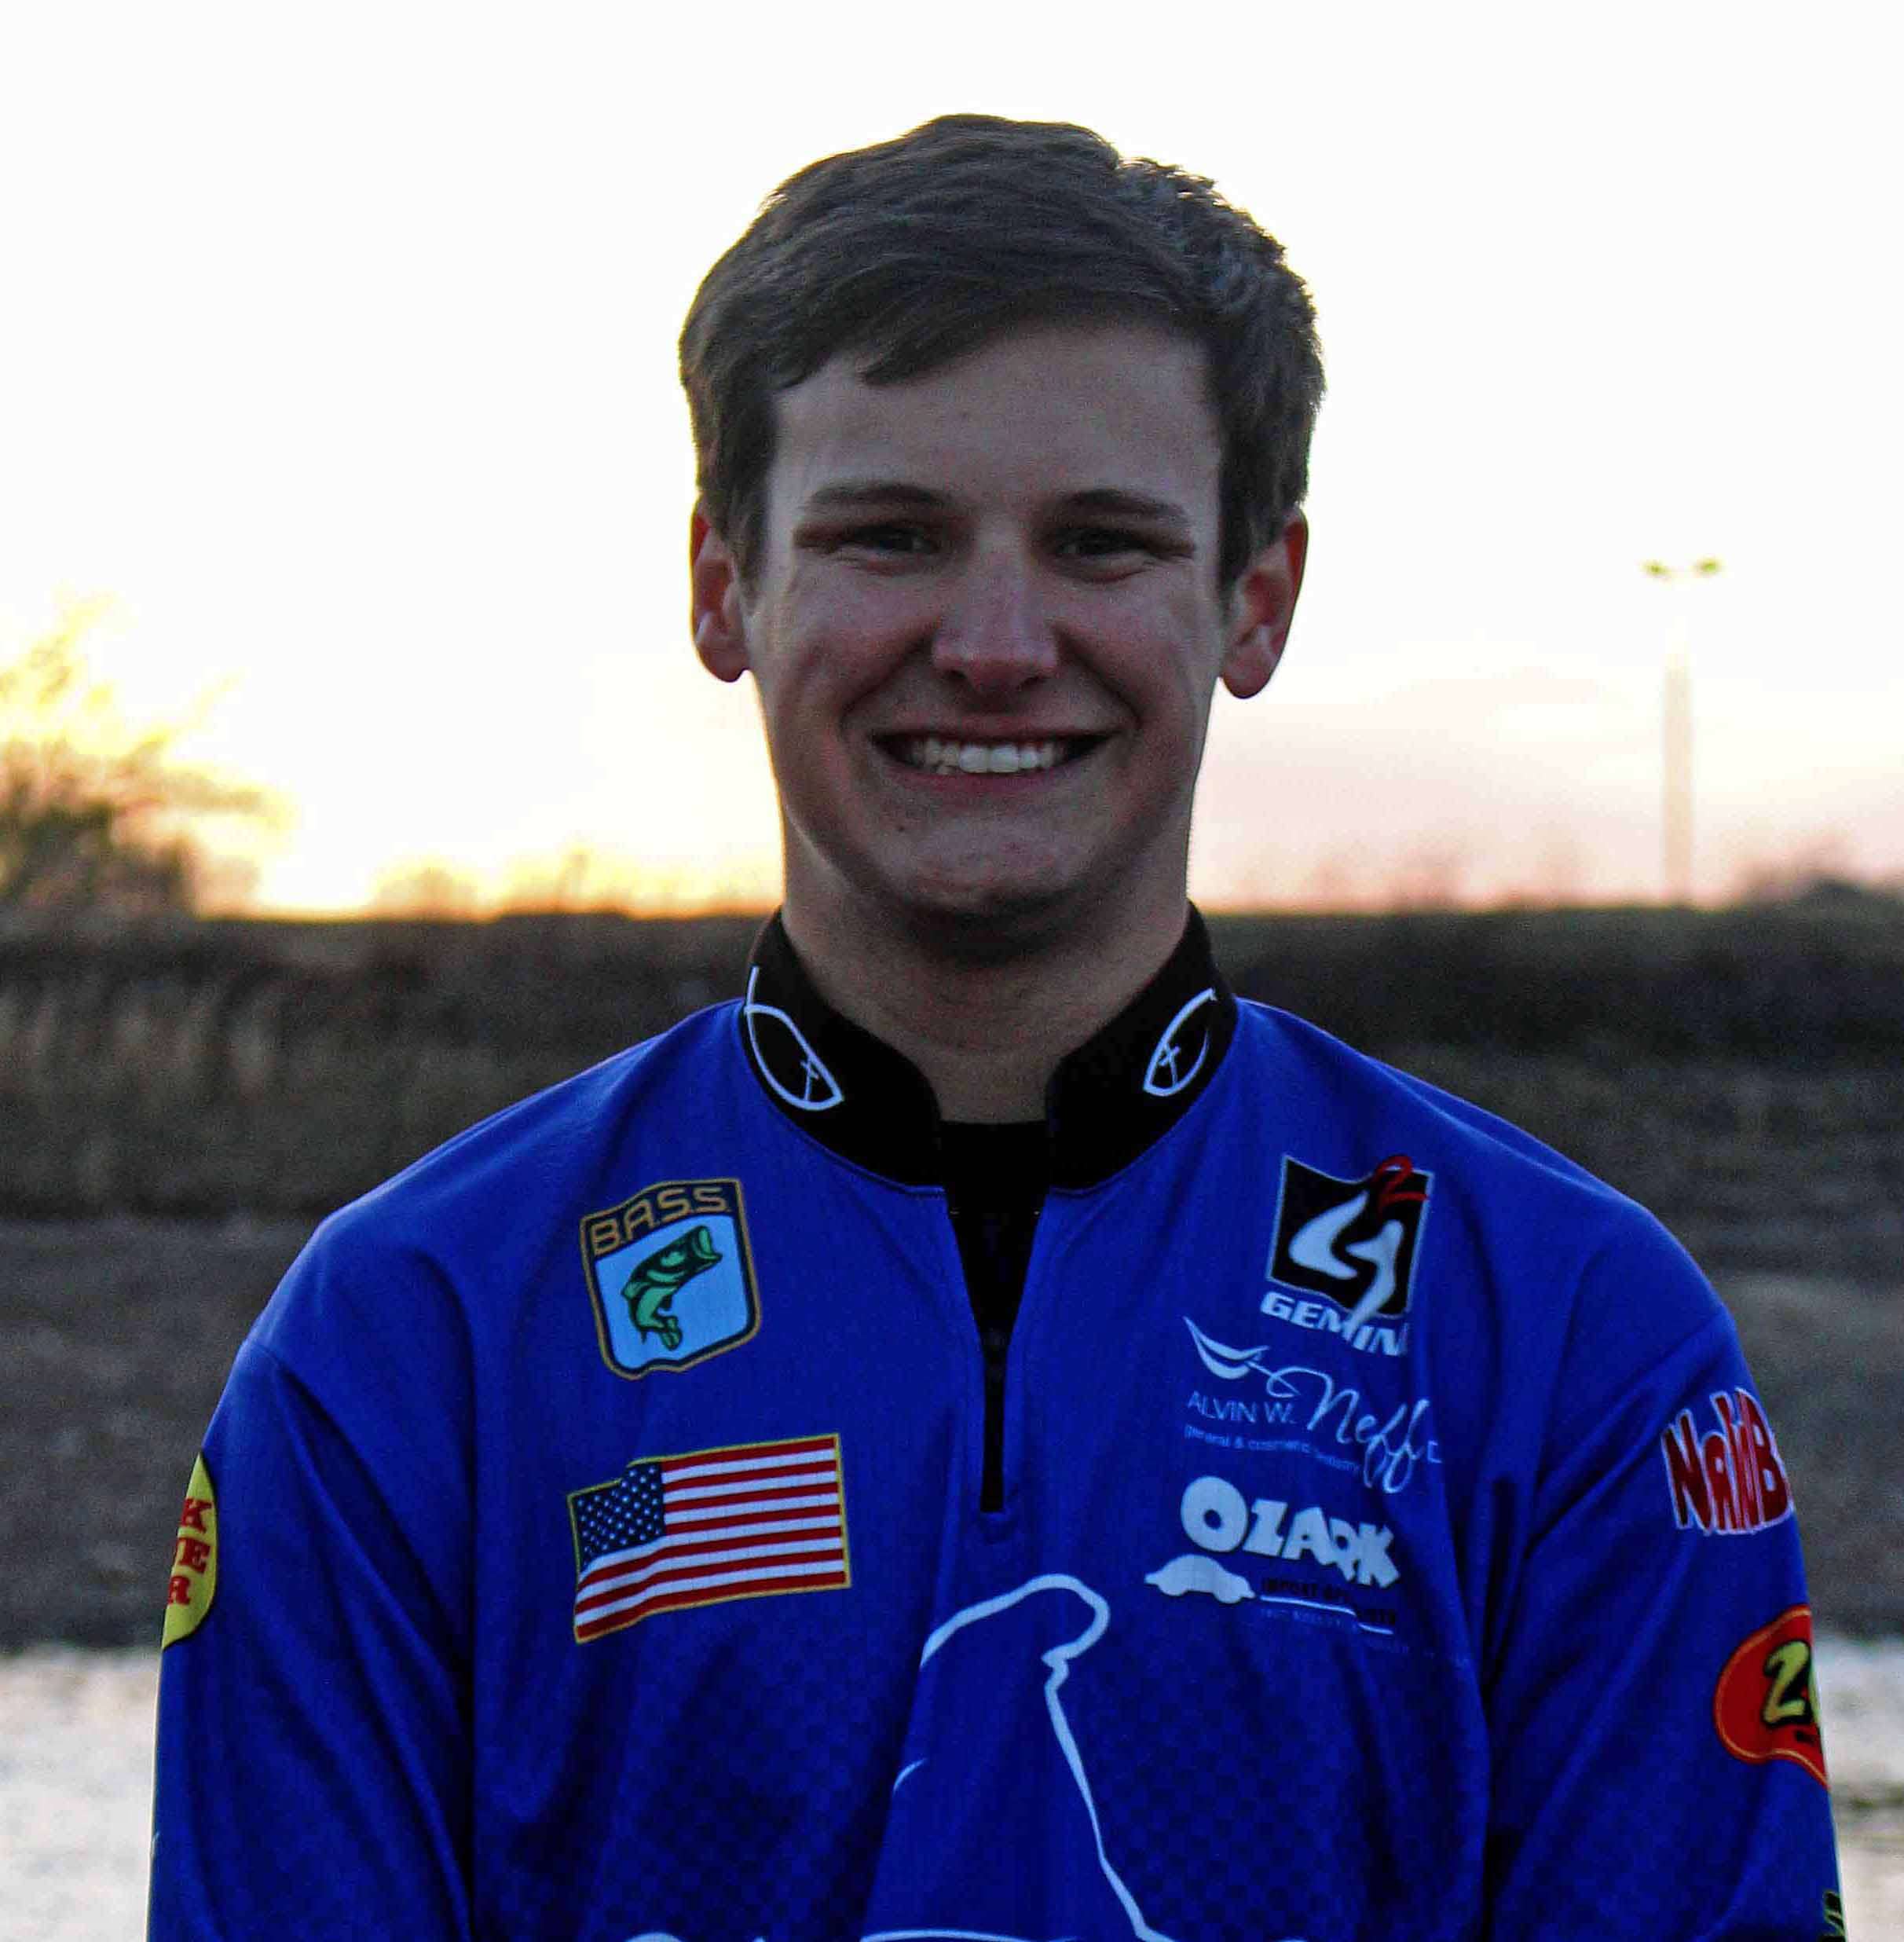 <b>Reese Jones, Rogers, Ark. </b><br>
A senior on the Rogers High School Bass Team, Jones has tallied an impressive four wins in the past 12 months. Jones also chalked up 10 other Top 10 finishes, including a four second-place showings at events on Beaver Lake and Tenkiller.
<p>

Jones is the three-year president of his bass fishing team and is a member of the Nation Honor Society, D.E.C.A. Leadership Team and the F.C.A. He has been awarded the Kansas State University Purple and White Leadership Scholarship and the Buck Family Foundation Local Scholarship, and he plans to pursue a business degree.
<p>

ââService Above Selfâ could very well be Reeseâs personal motto as he has accumulated over 200 hours of community service through his church and school outreach projects,â wrote D.E.C.A. Advisor Tom Woodruff.
